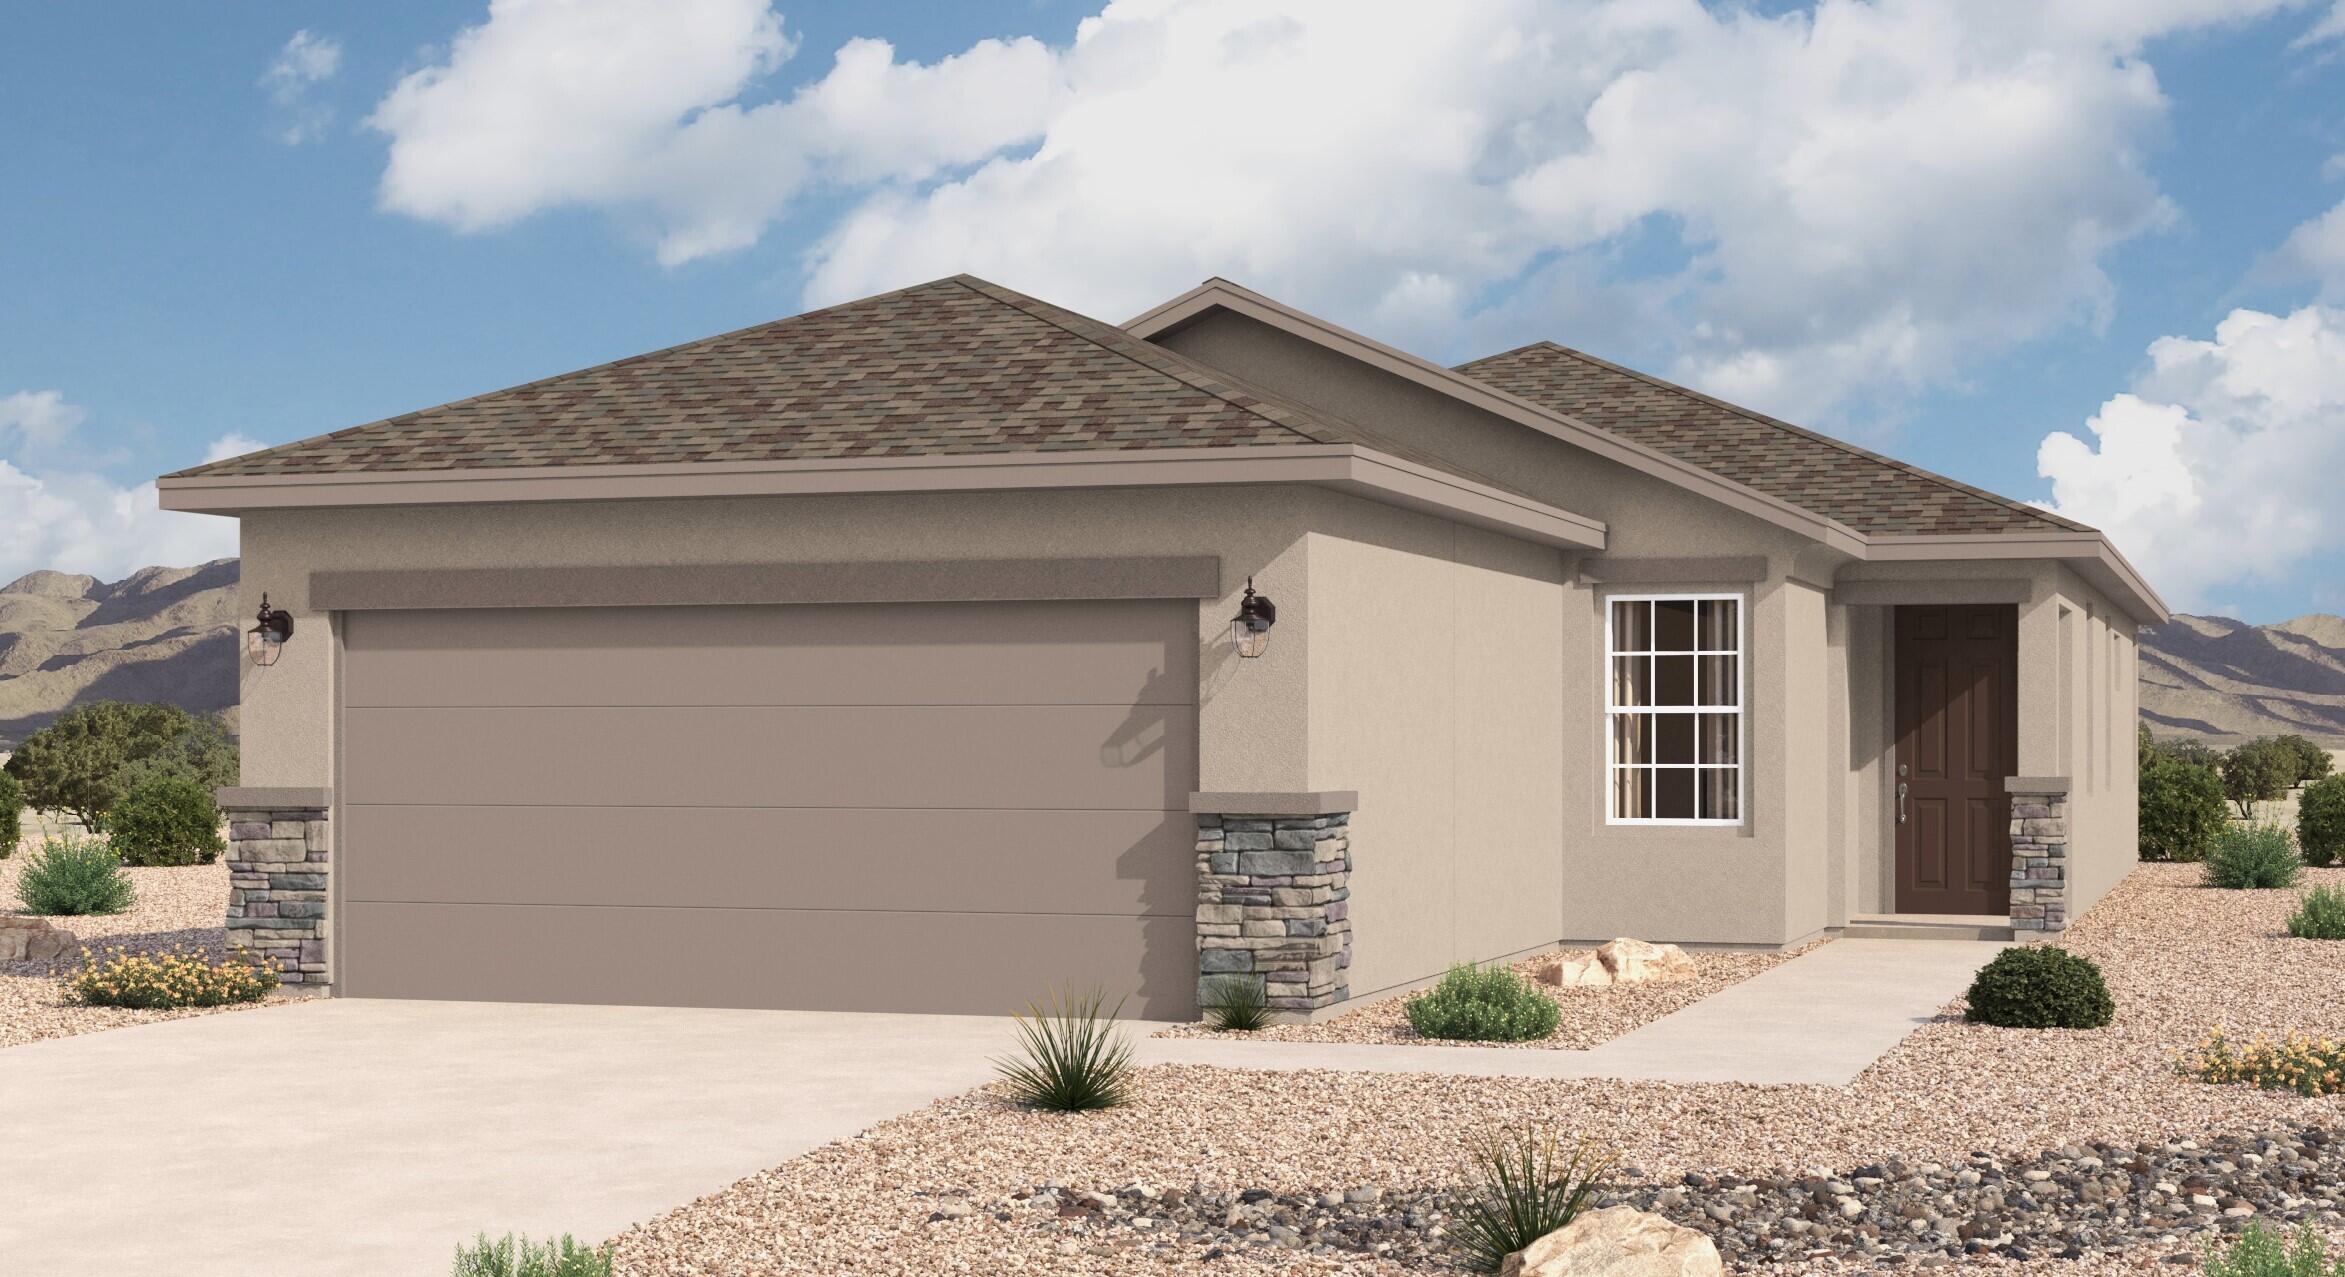 This home design features 3 bedrooms, 2 bathrooms, 2 car garage with a welcoming entry that opens to a bright, elegant great room. The kitchen-dining-great room configuration is ideal for family living or festive gathering. Home is still under construction.